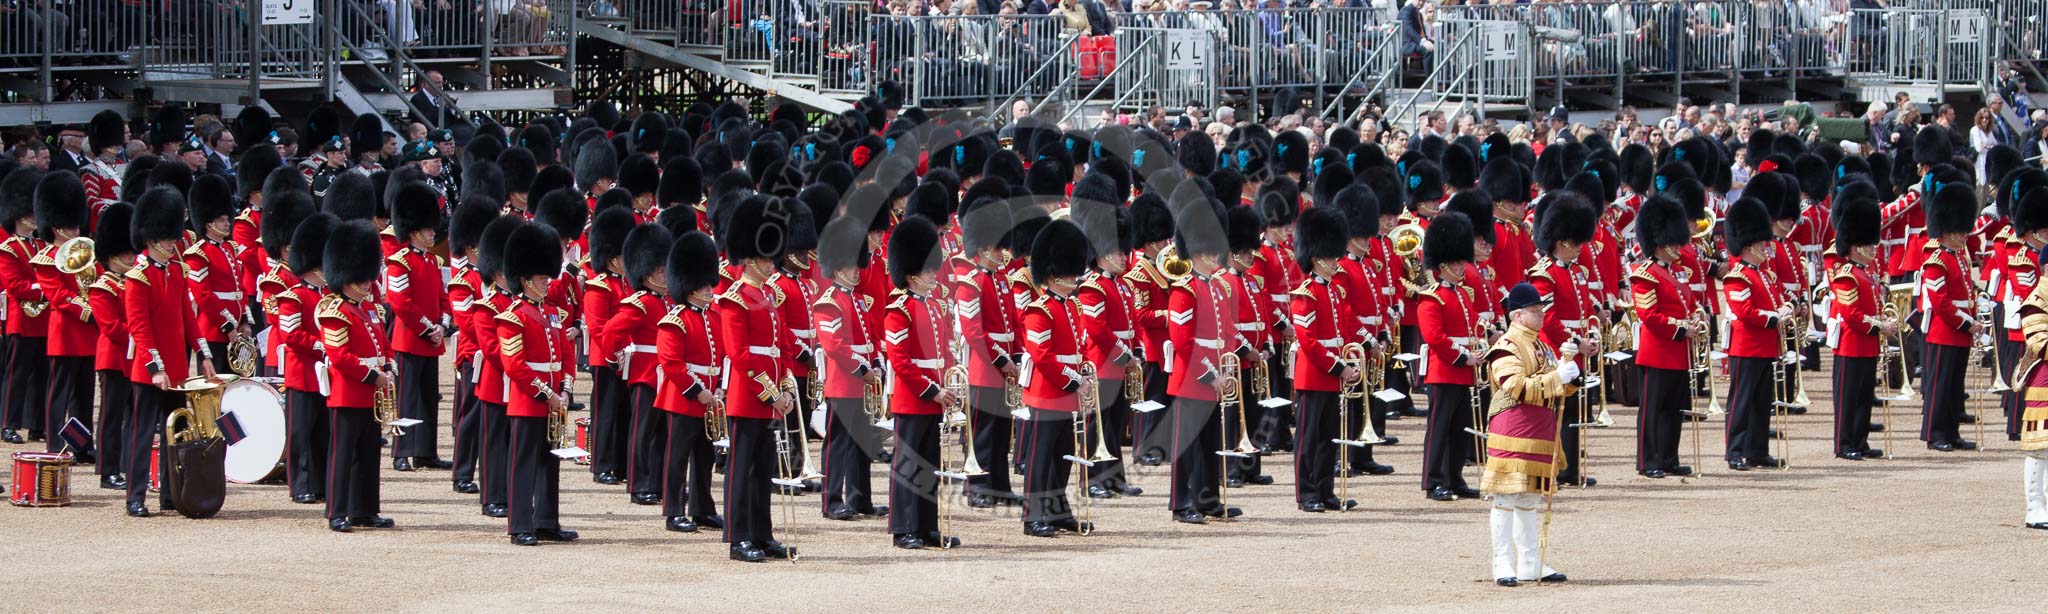 Trooping the Colour 2012: With the Massed Bands in place on the Wester Side of Horse Guards Parade, the parade is about to begin..
Horse Guards Parade, Westminster,
London SW1,

United Kingdom,
on 16 June 2012 at 10:32, image #77